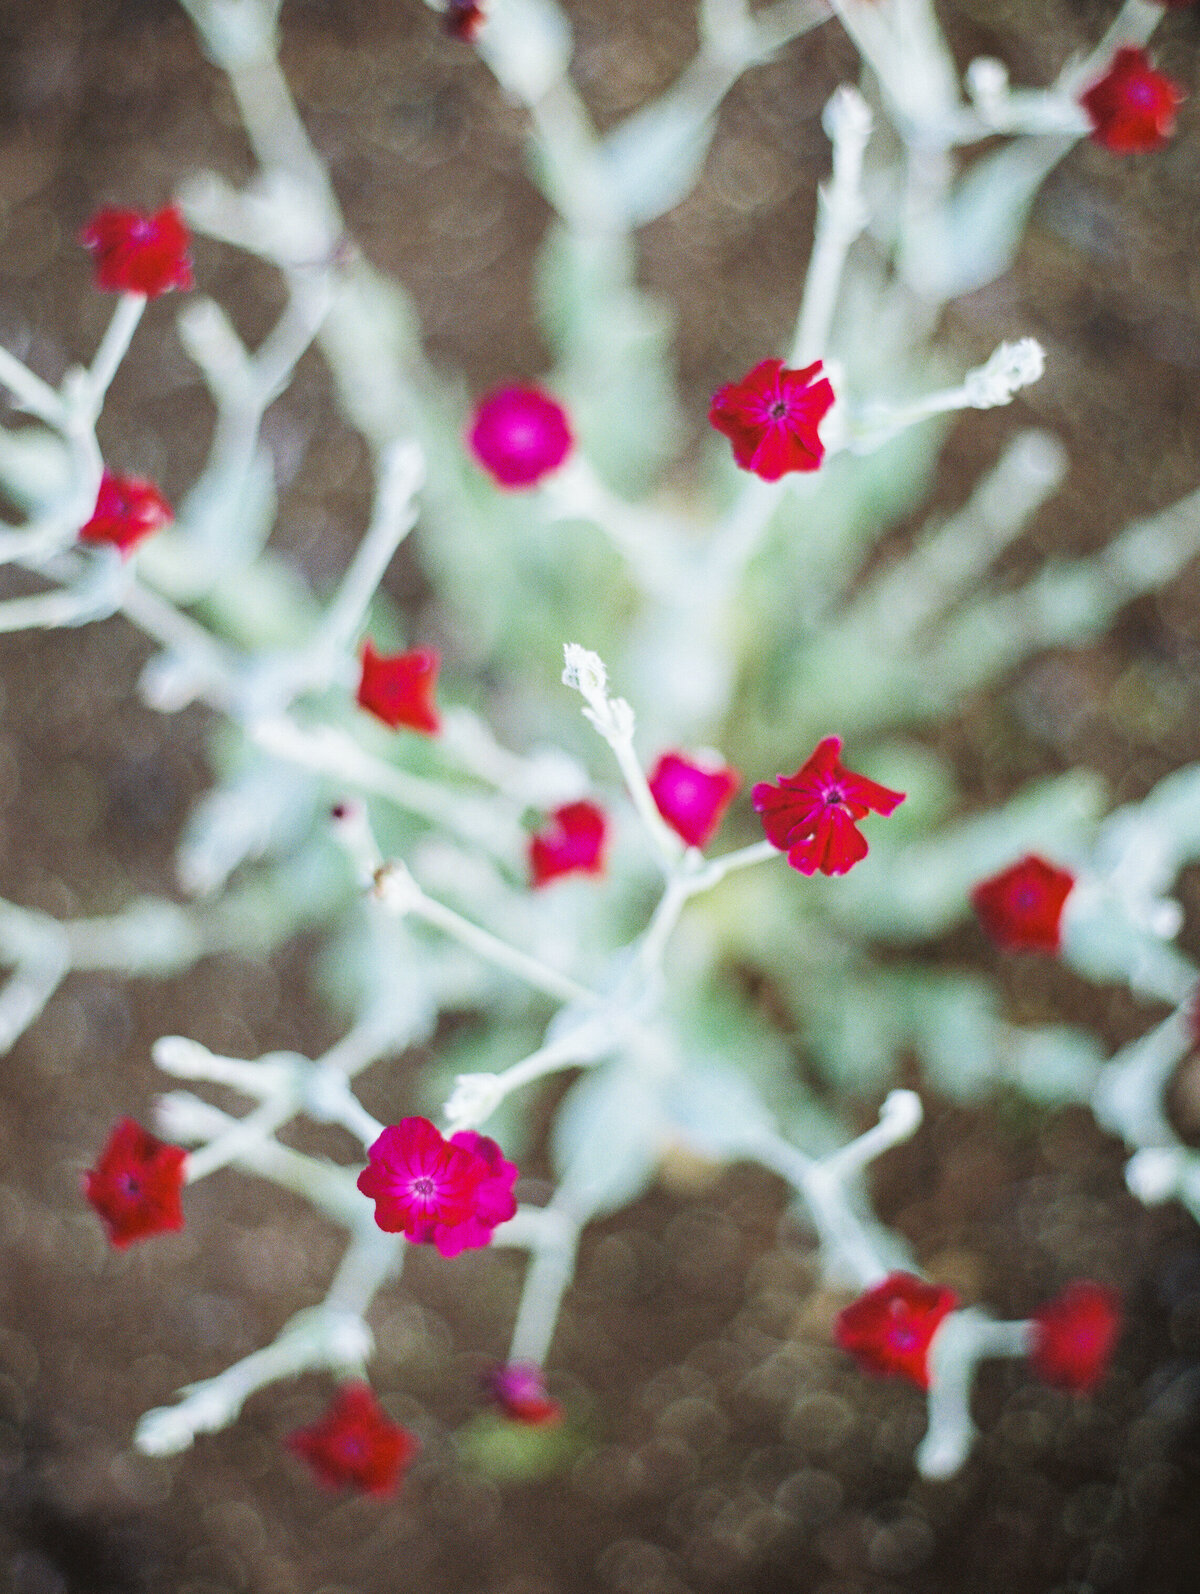 Close-up photo of a plant with small red flowers